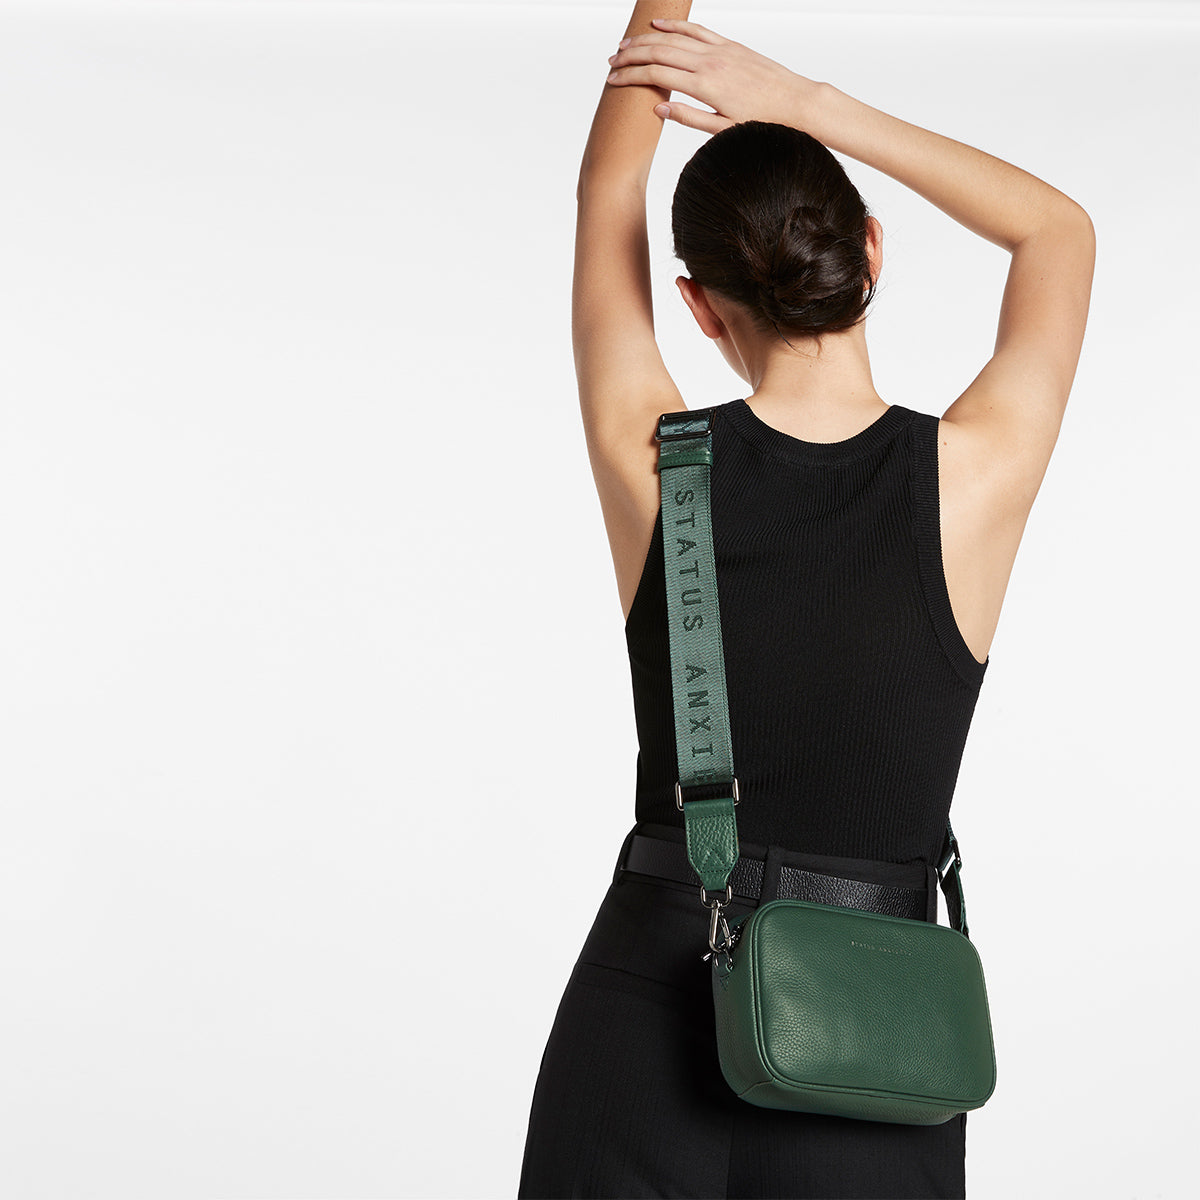 Status Anxiety Green Web Strap for Plunder Bag